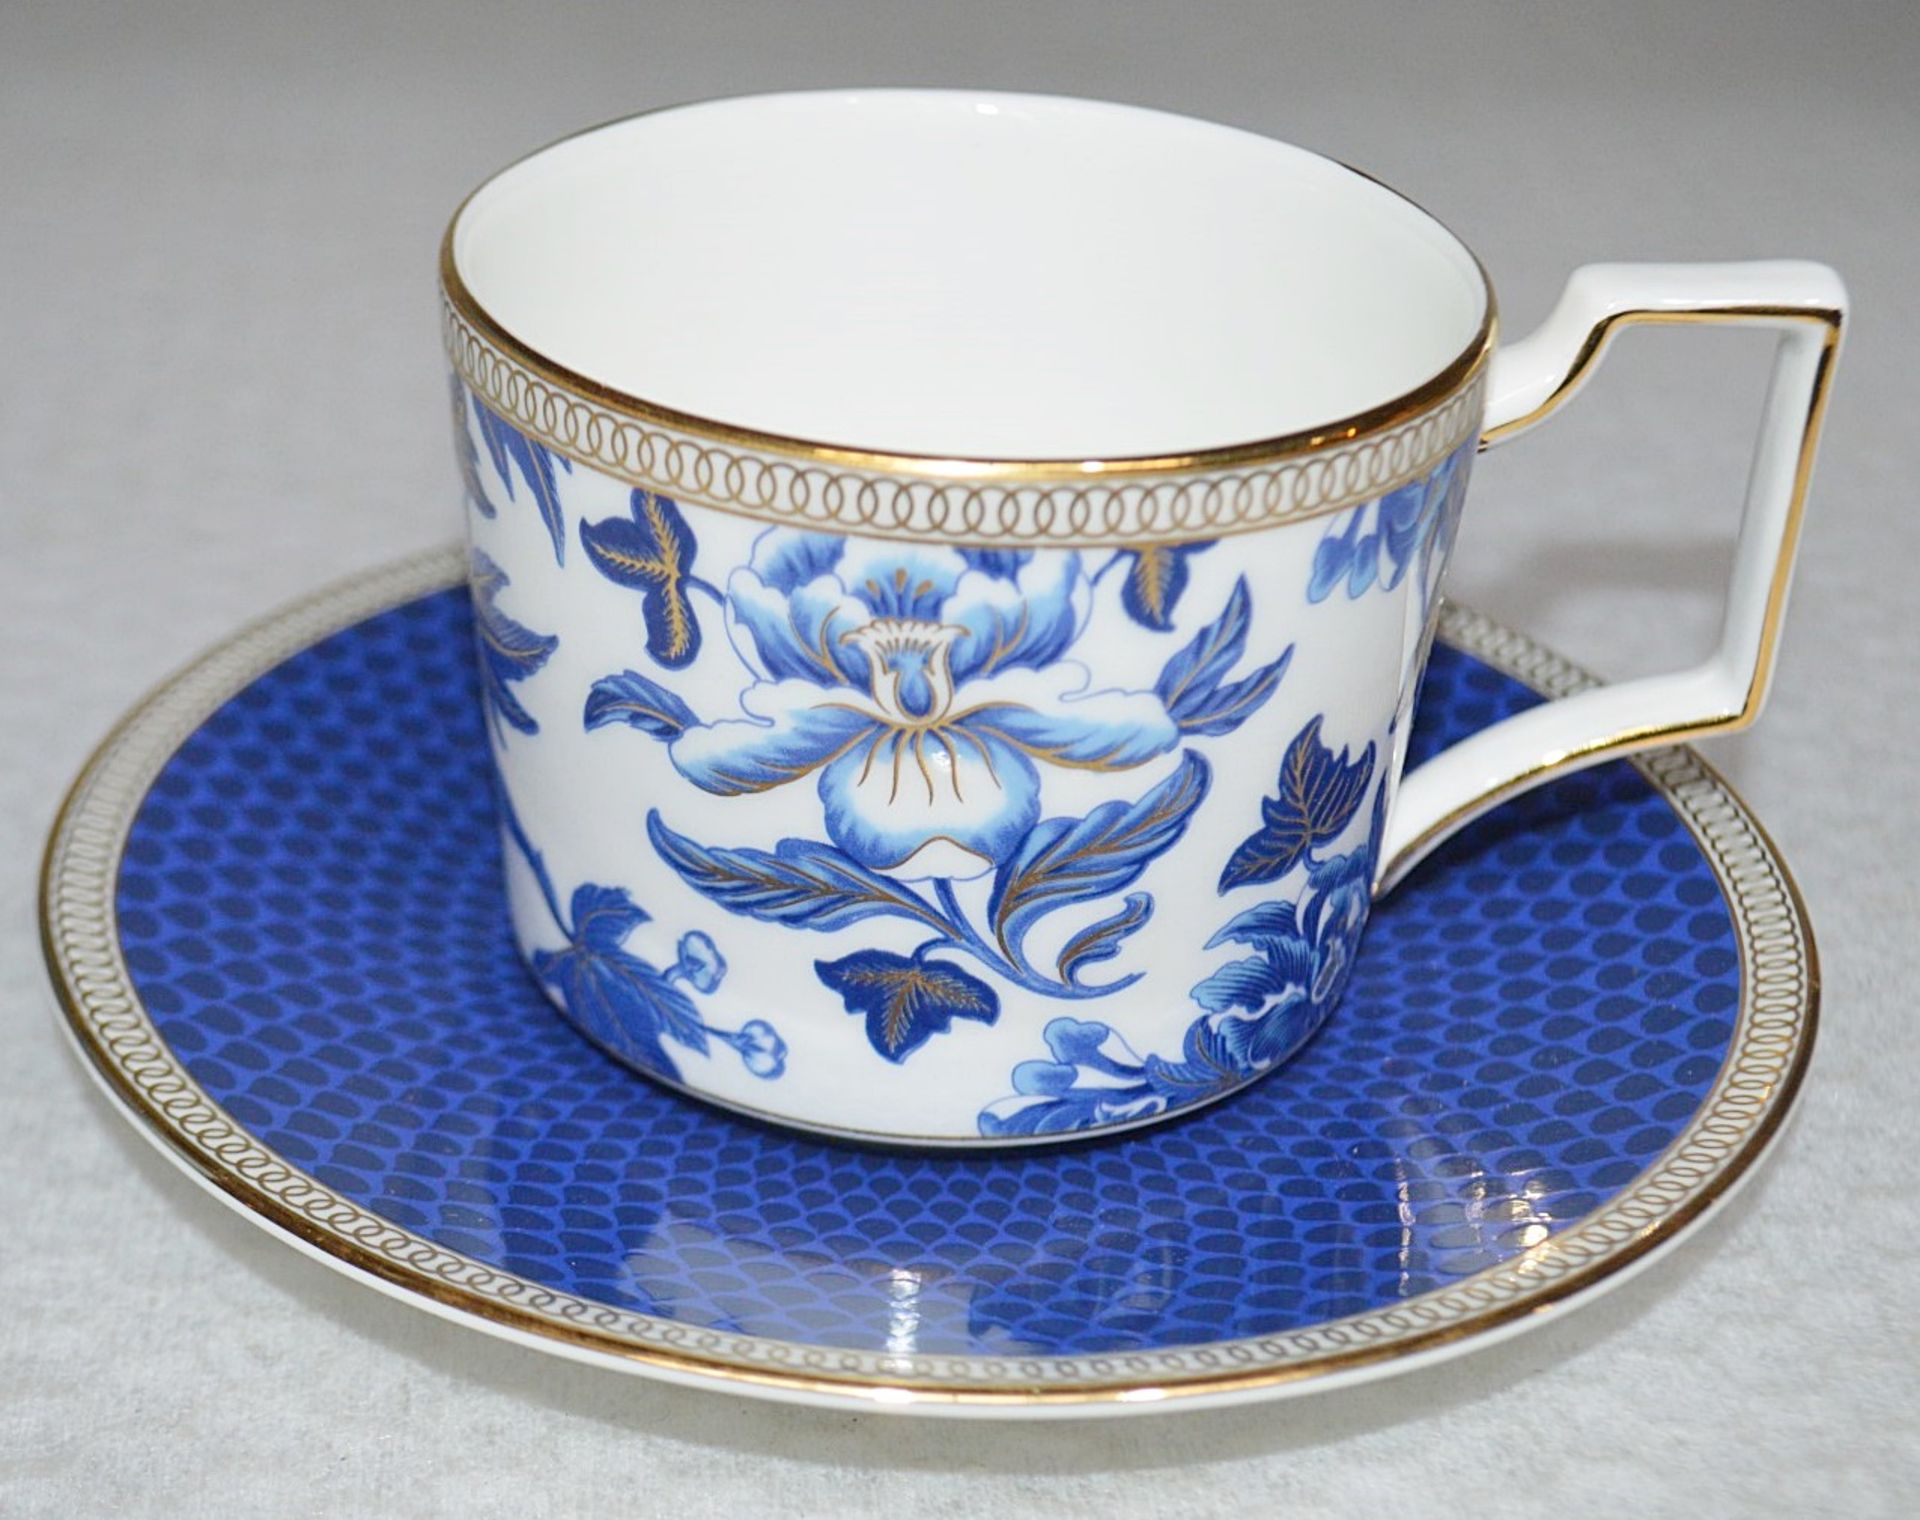 1 x WEDGWOOD 'Hibiscus' Bone China Teacup and Saucer - Original RRP £75.00 - Unused Boxed Stock - - Image 2 of 10